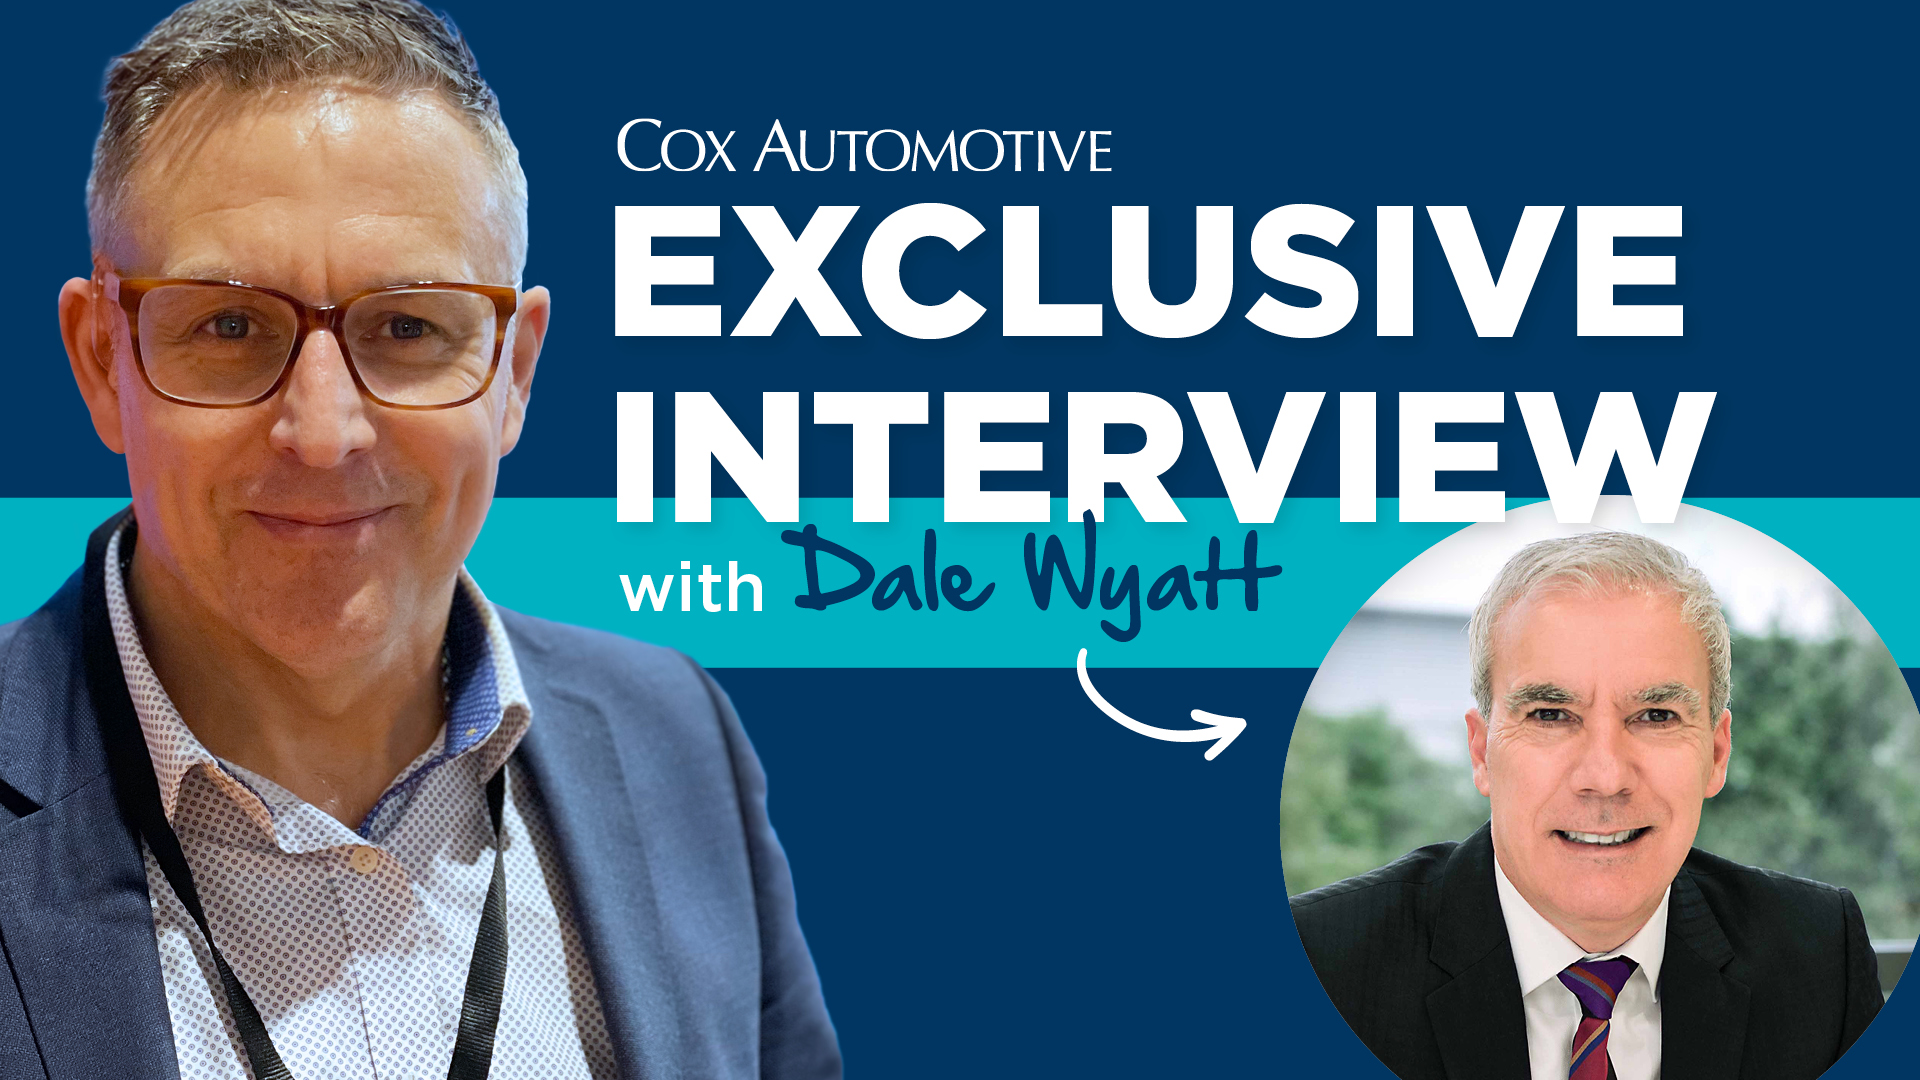 The Dale Wyatt Interview | Cox Automotive Podcast